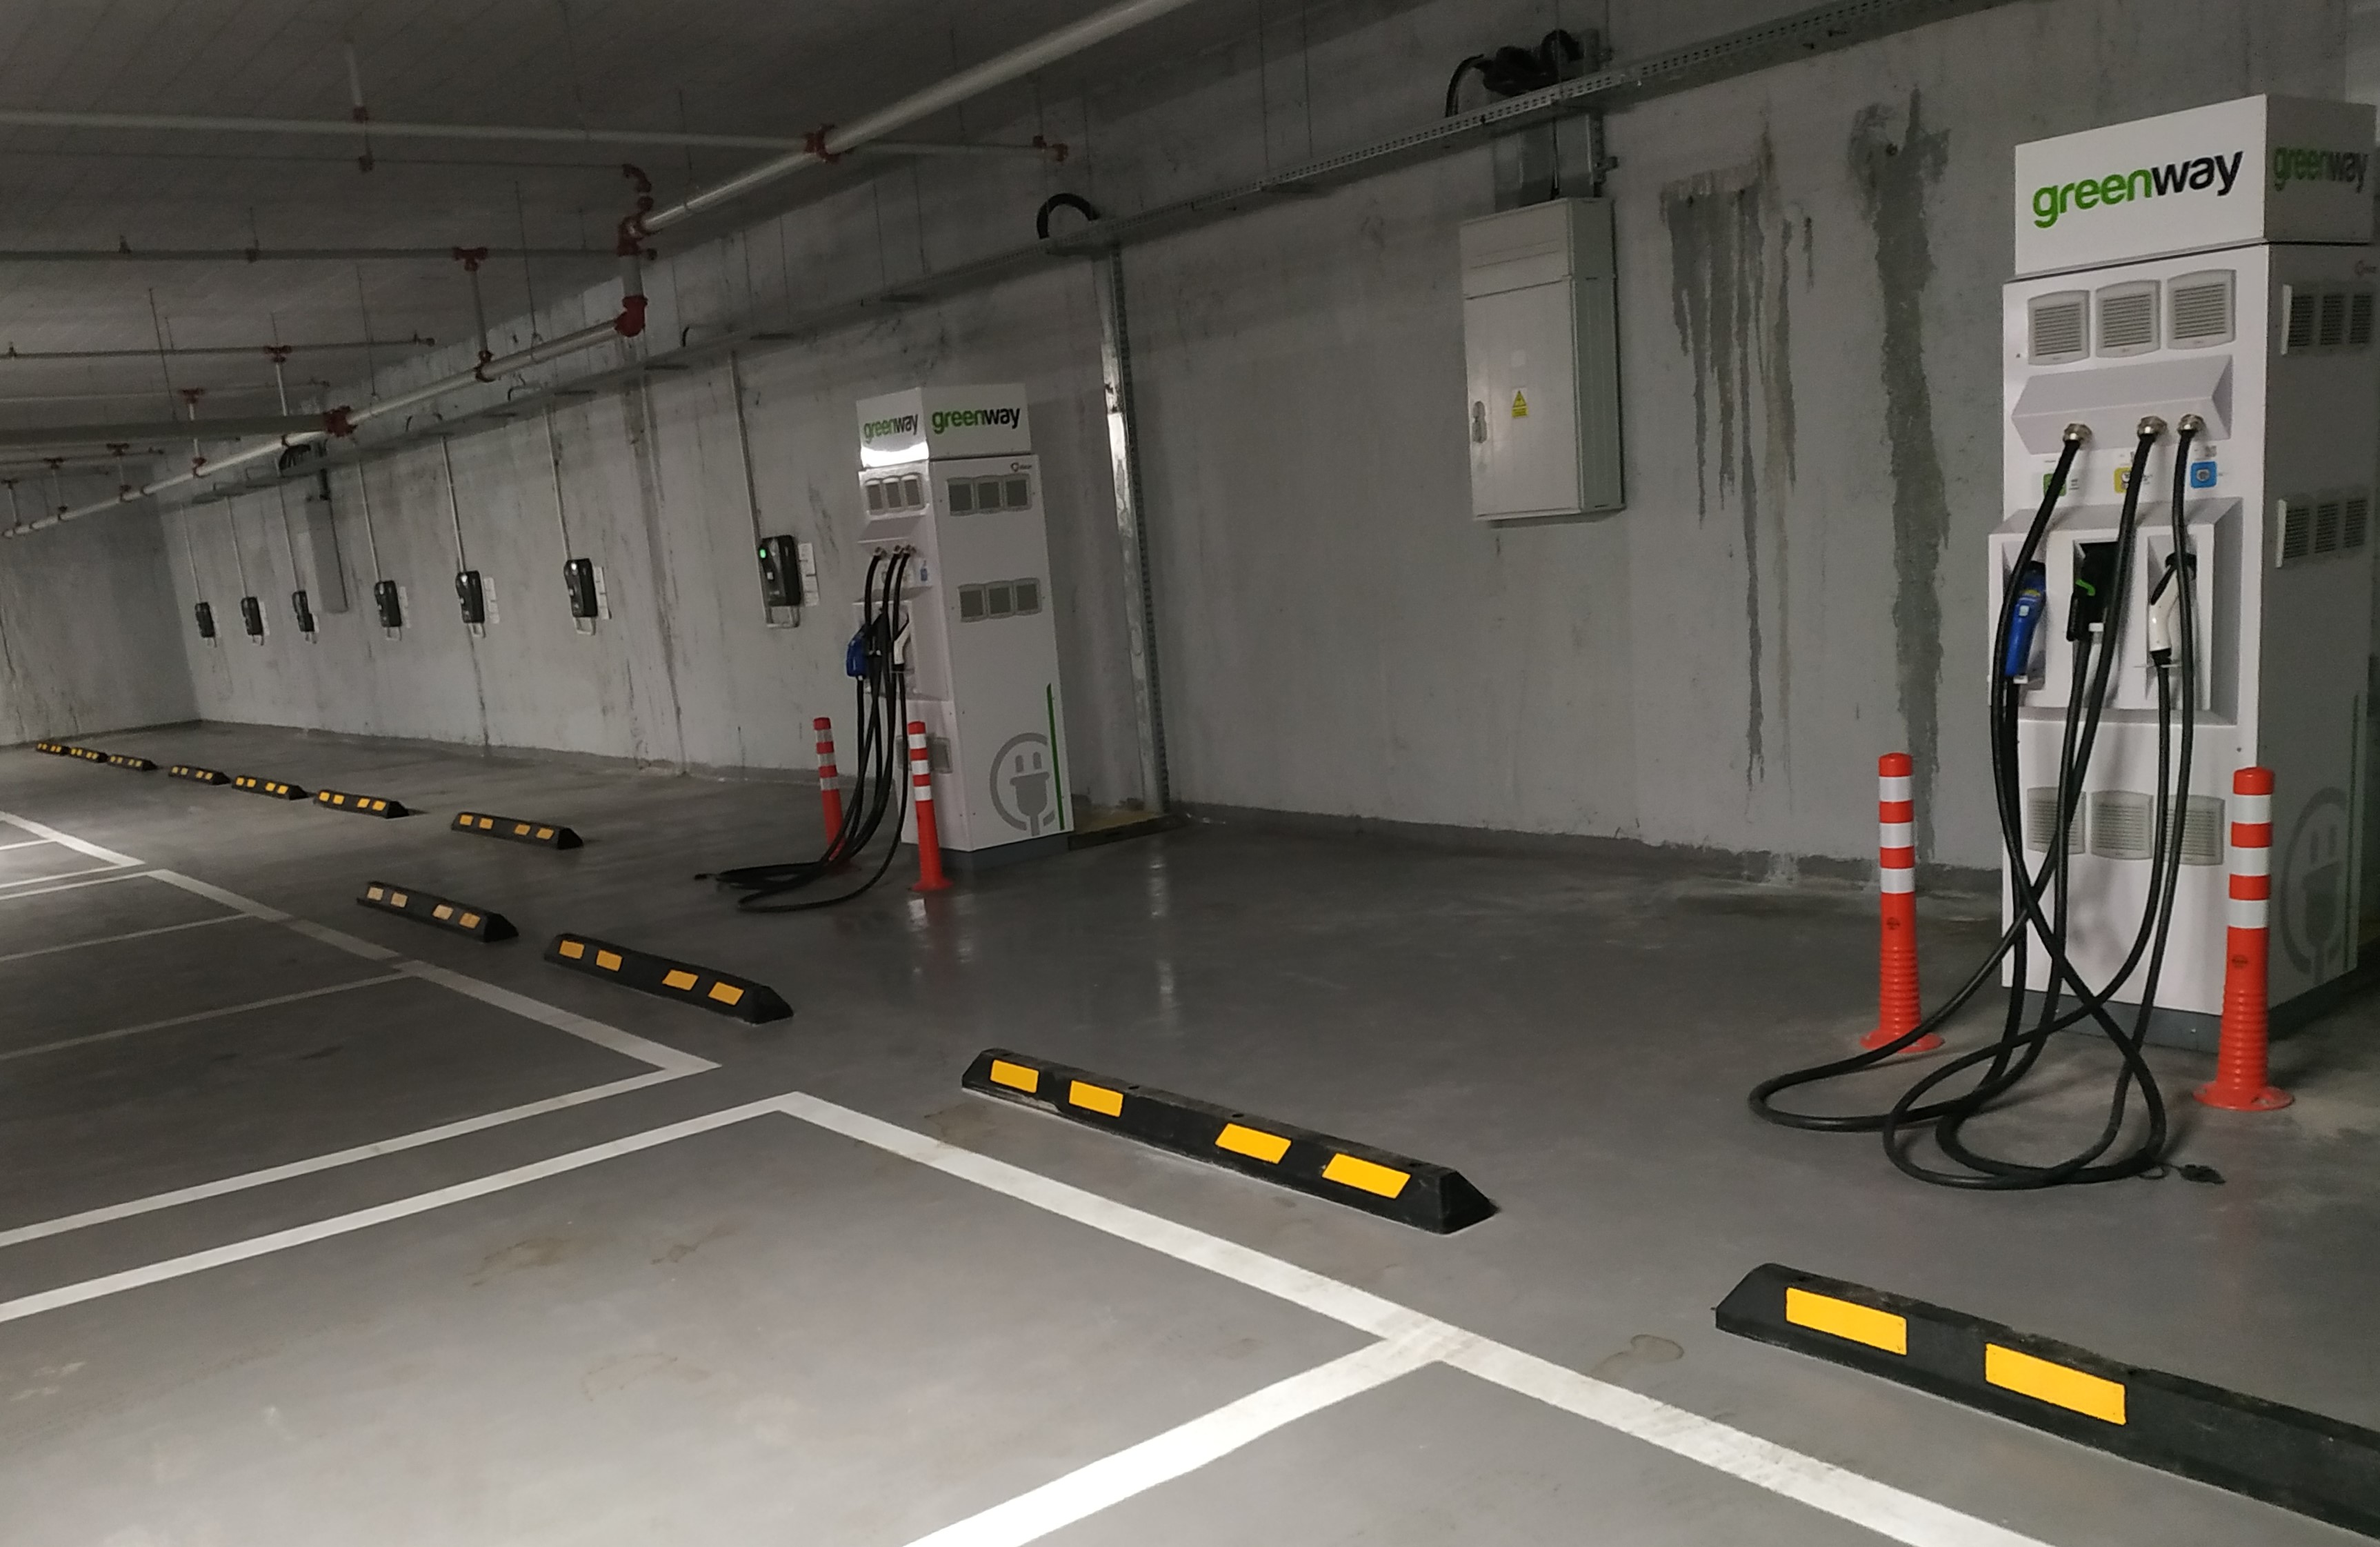 GreenWay opens first electric vehicle charging hub in Poland up to 11